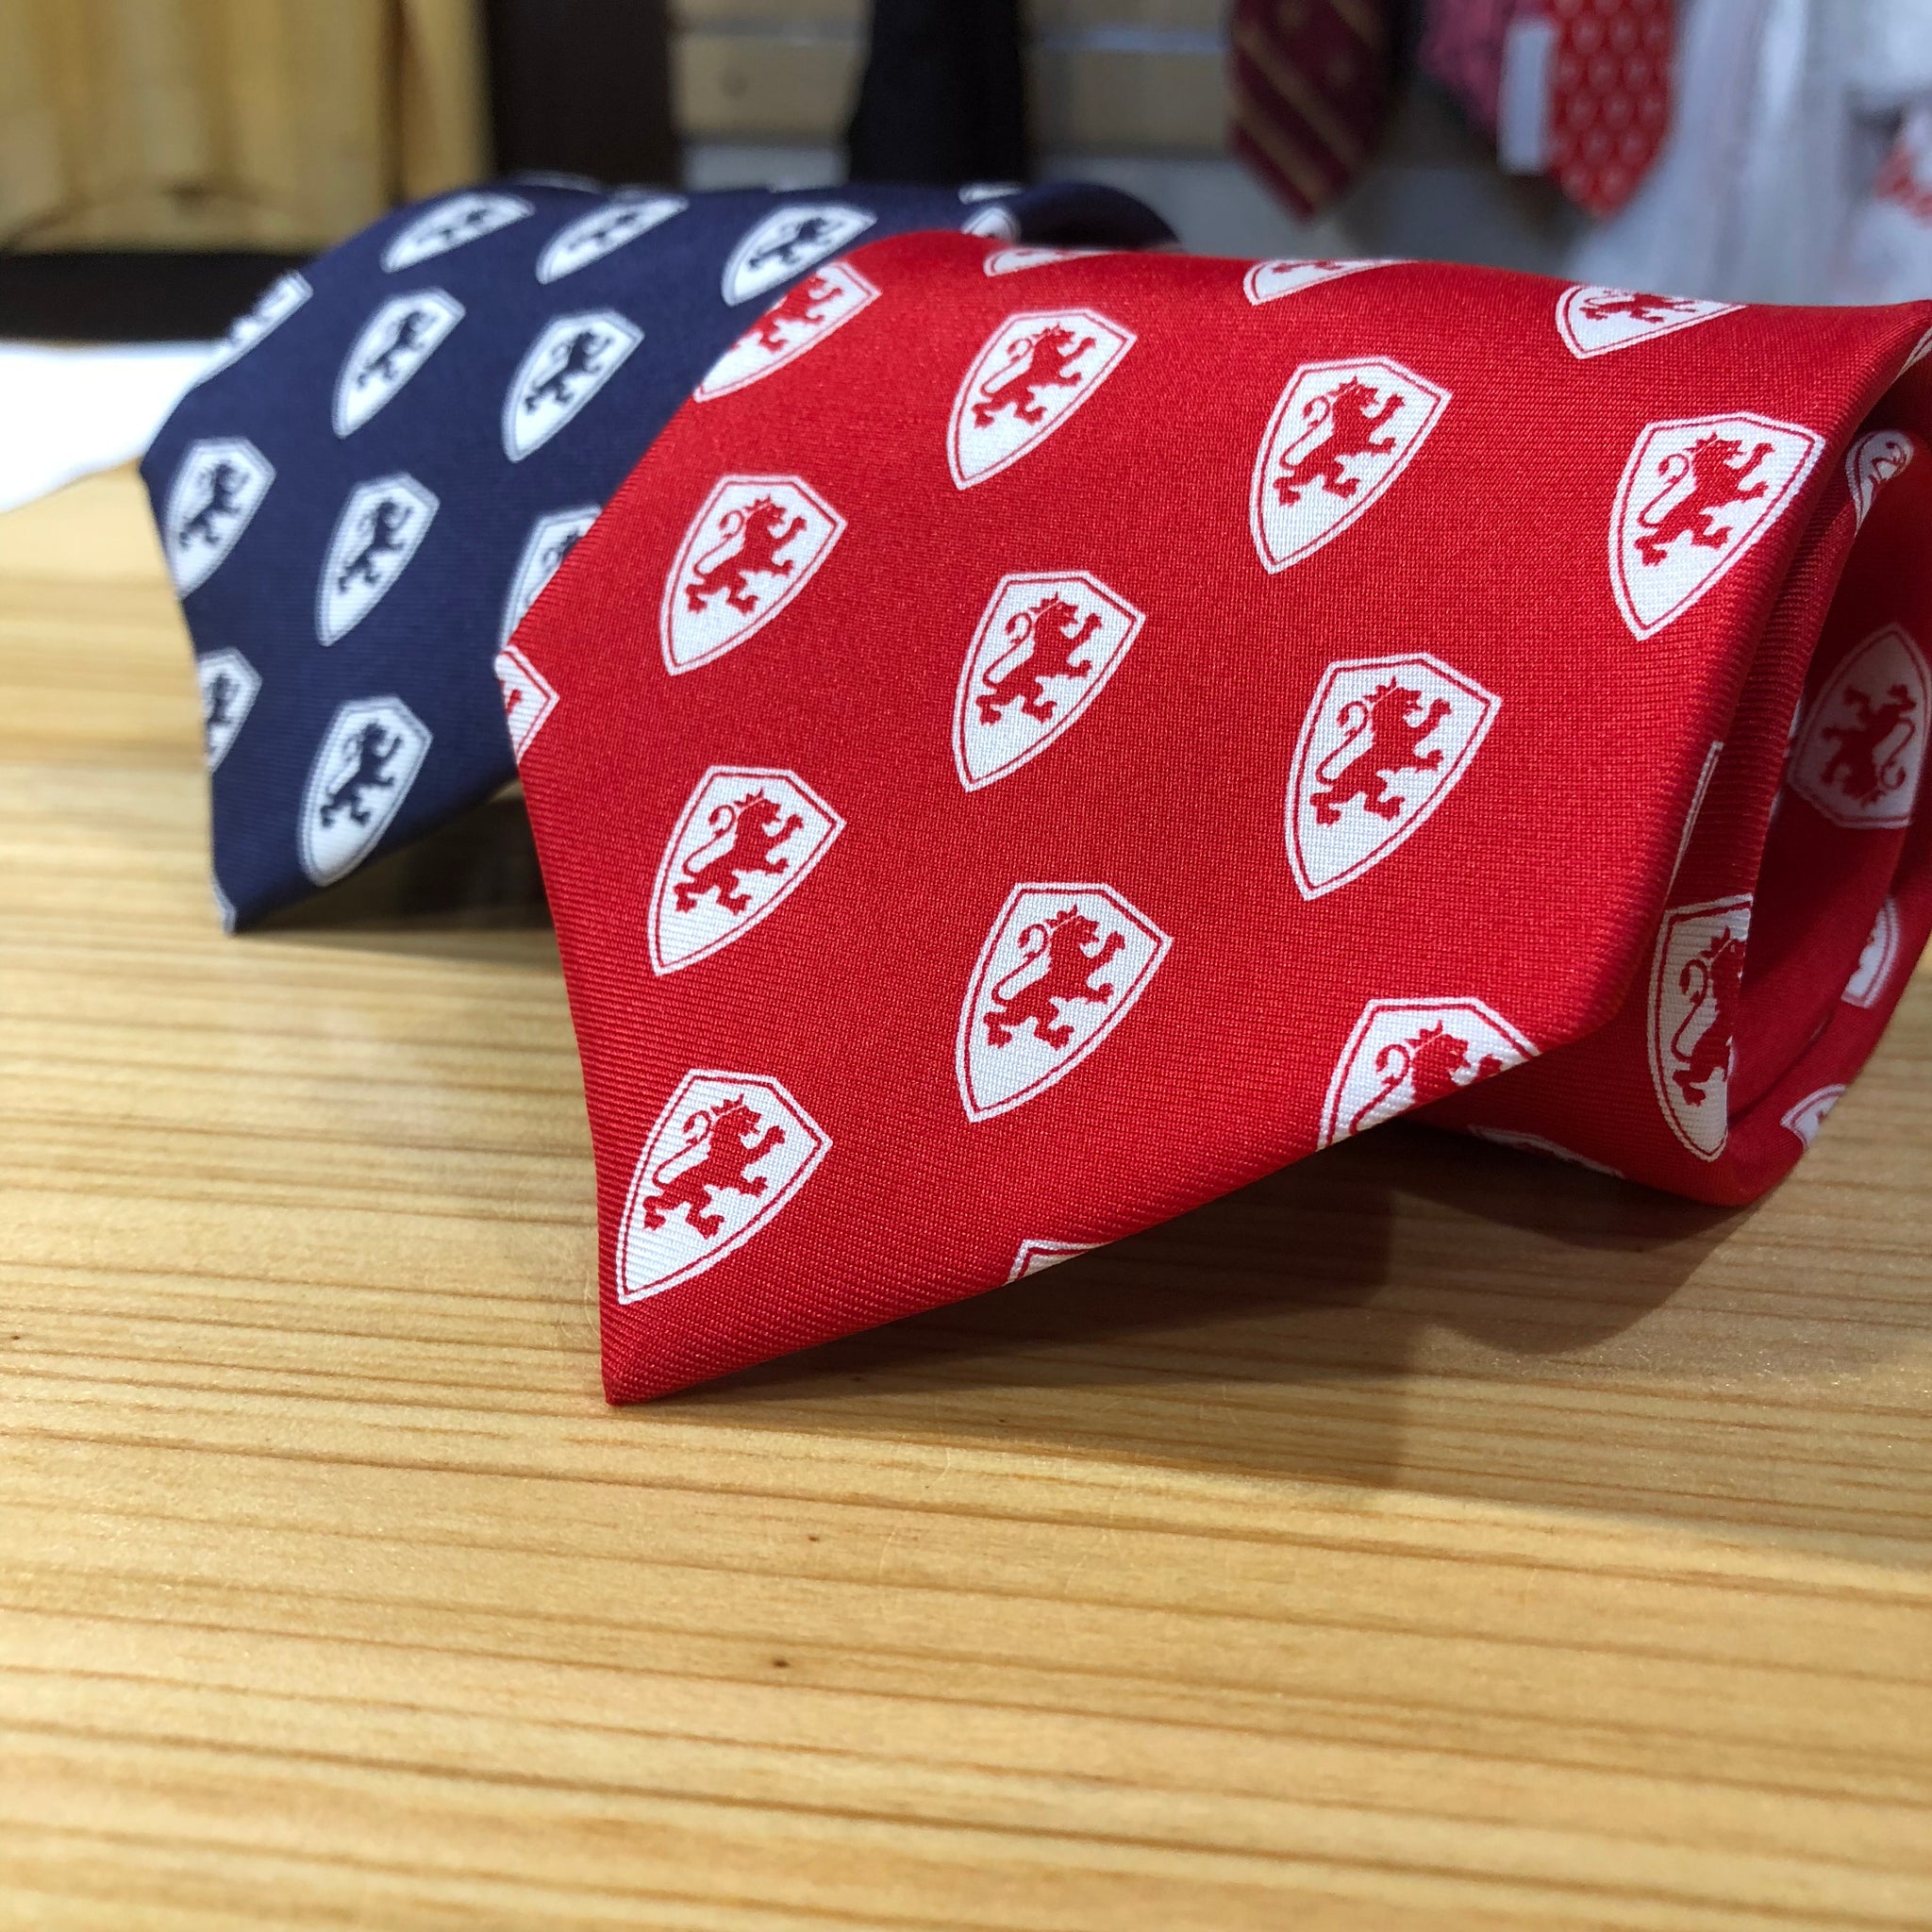 2 silk ties rolled up. dark blue with white Flagler college shield logos and crimson red with white Flagler college shield logos